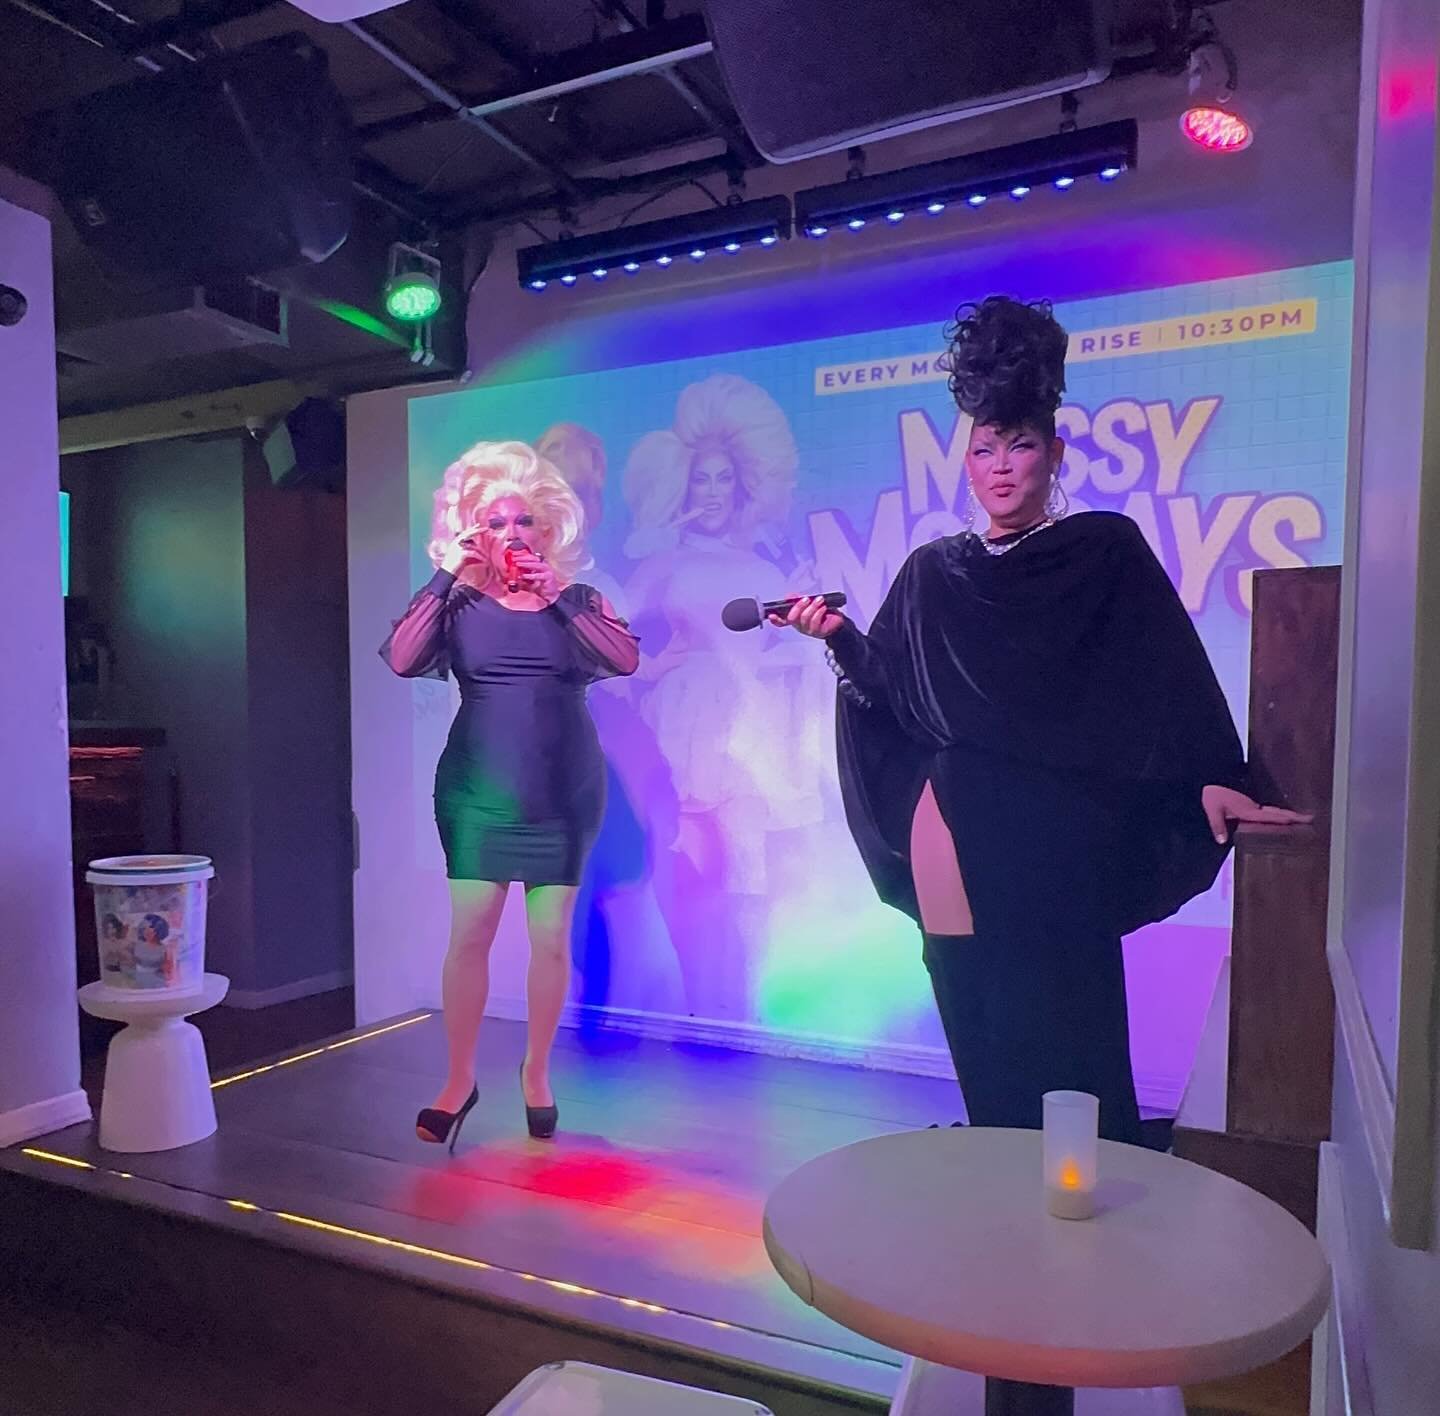 She puts the PISS in Pissi Myles and whenever you&rsquo;re with her it&rsquo;s a privilege to pee&hellip;give it up for Pissi Myles and Jasmine Rice LaBeija TONIGHT for Messy Mondays at Rise! Show time at 10:30!